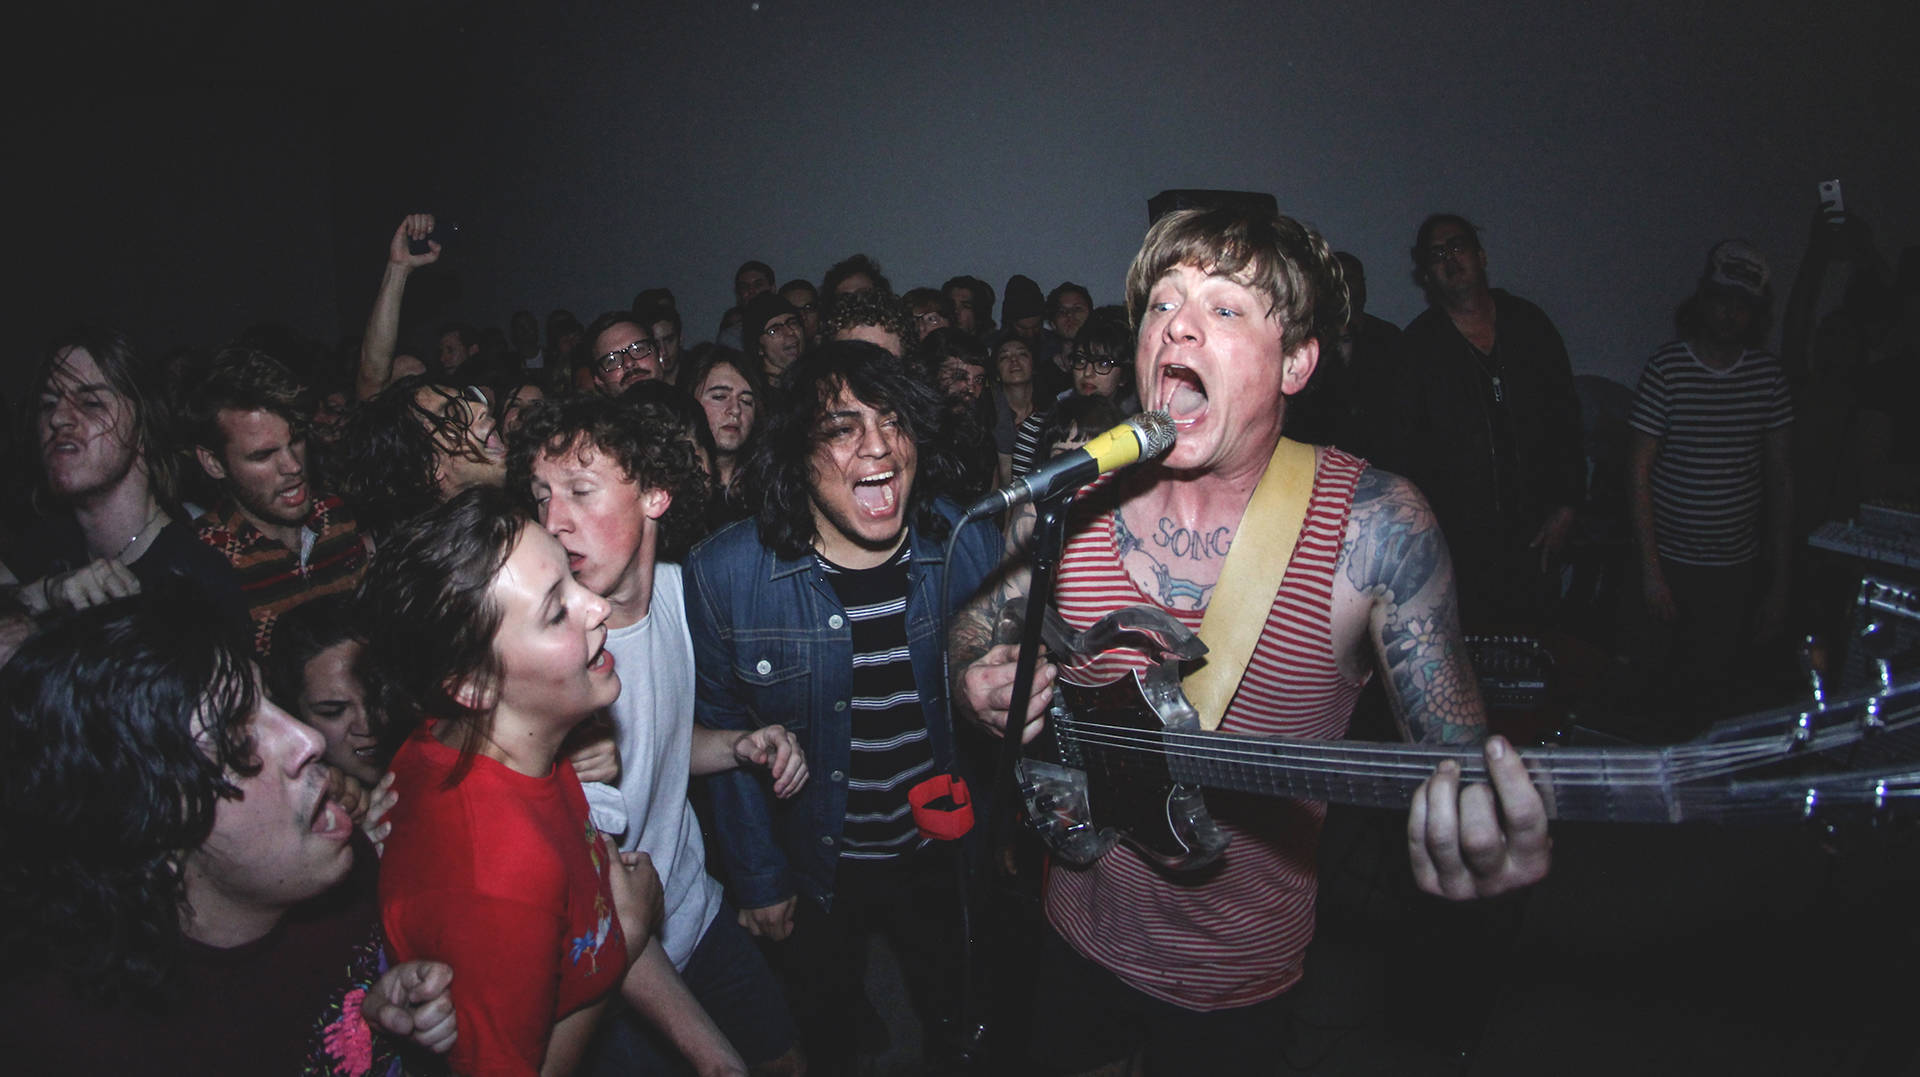 John Dwyer singing with his band Thee Oh Sees Mini Van Photography